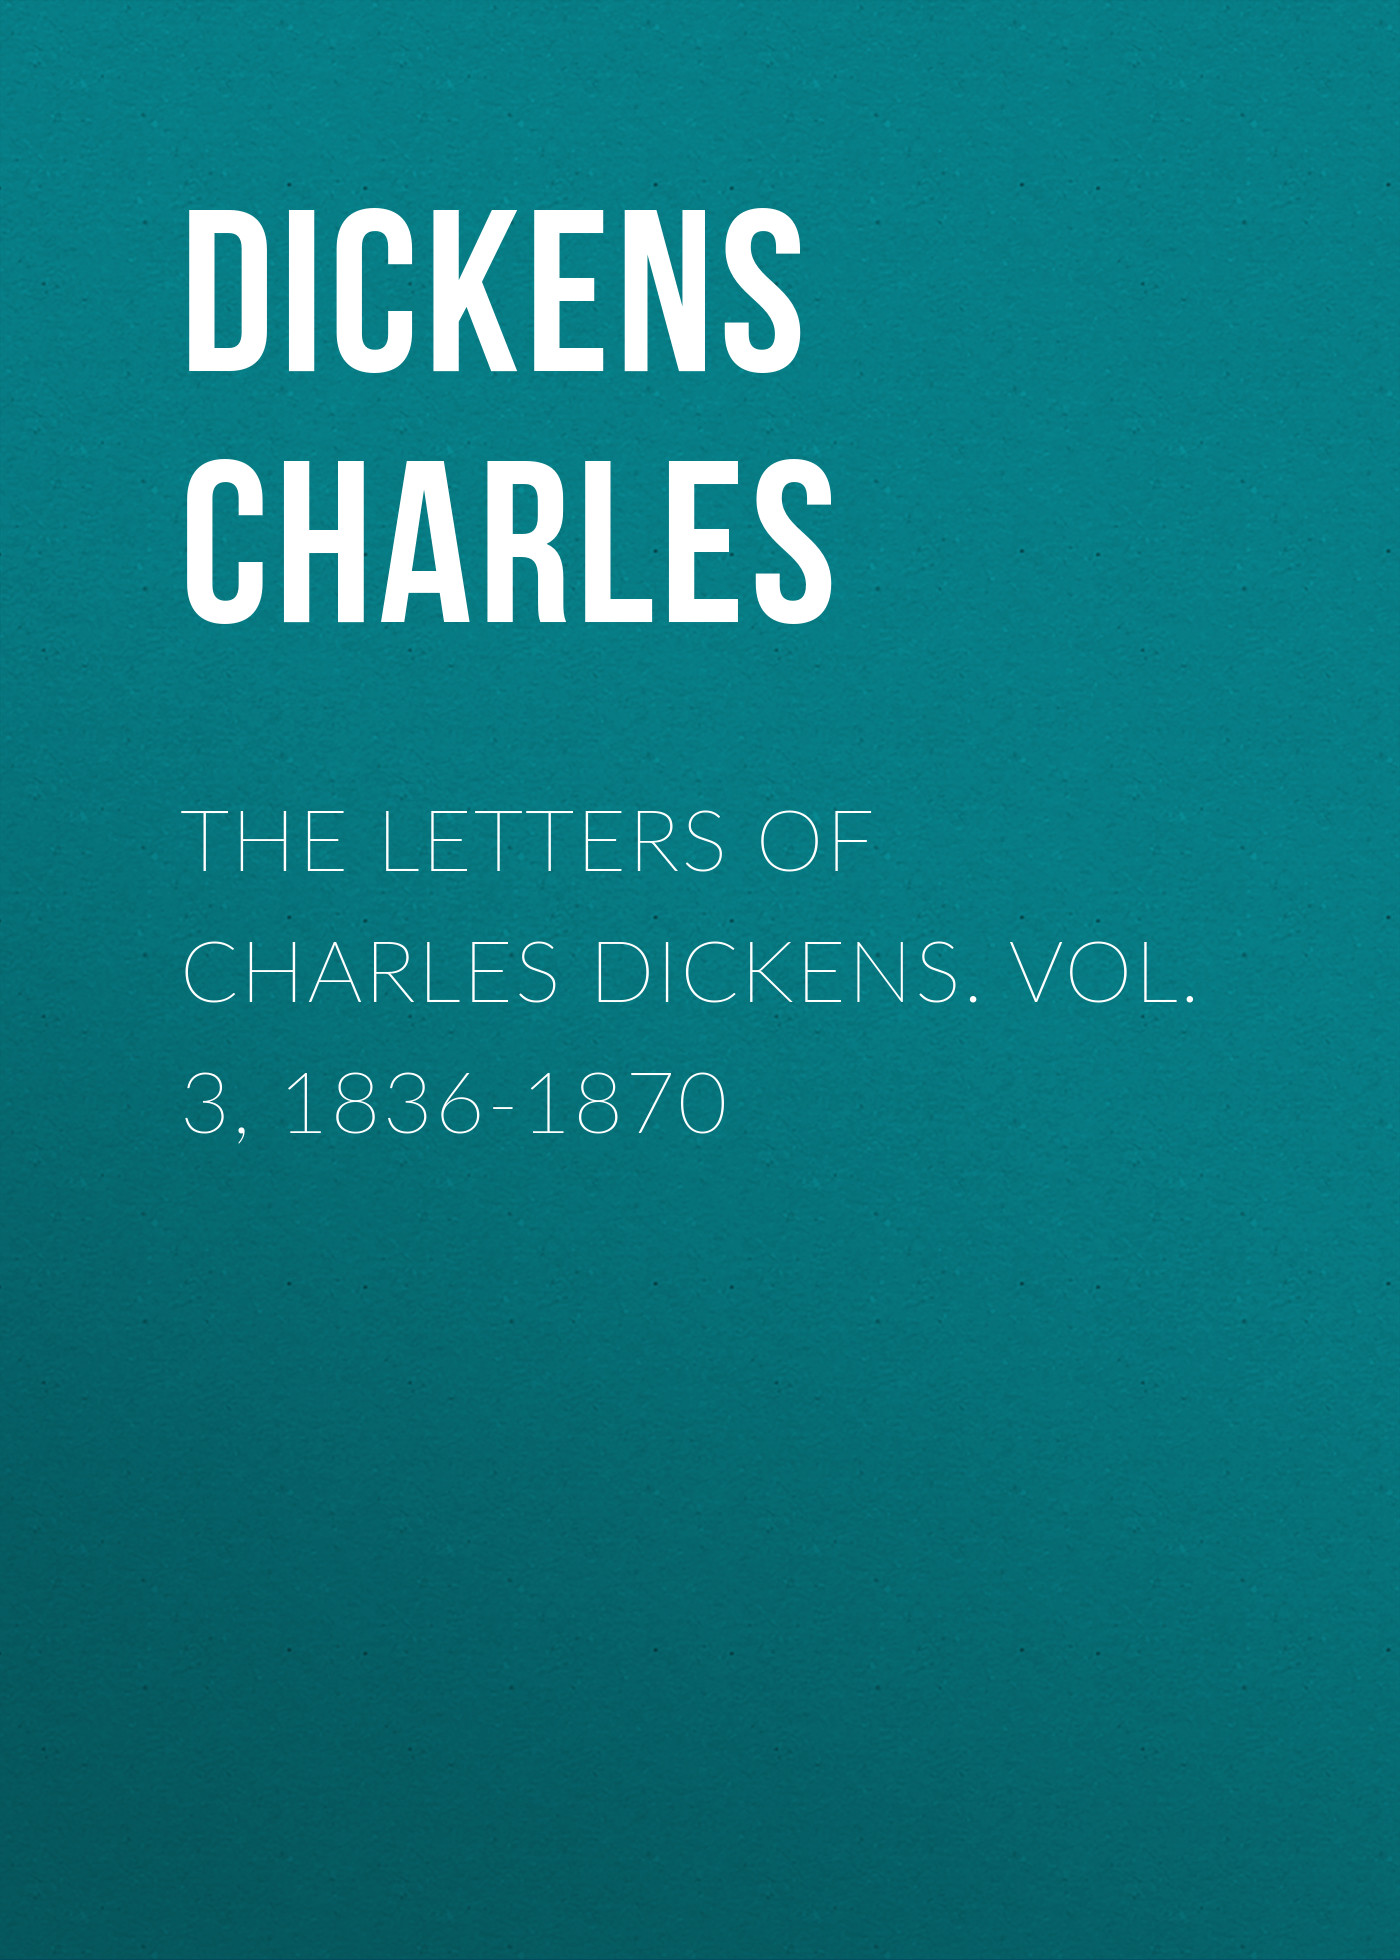 The Letters of Charles Dickens. Vol. 3, 1836-1870 